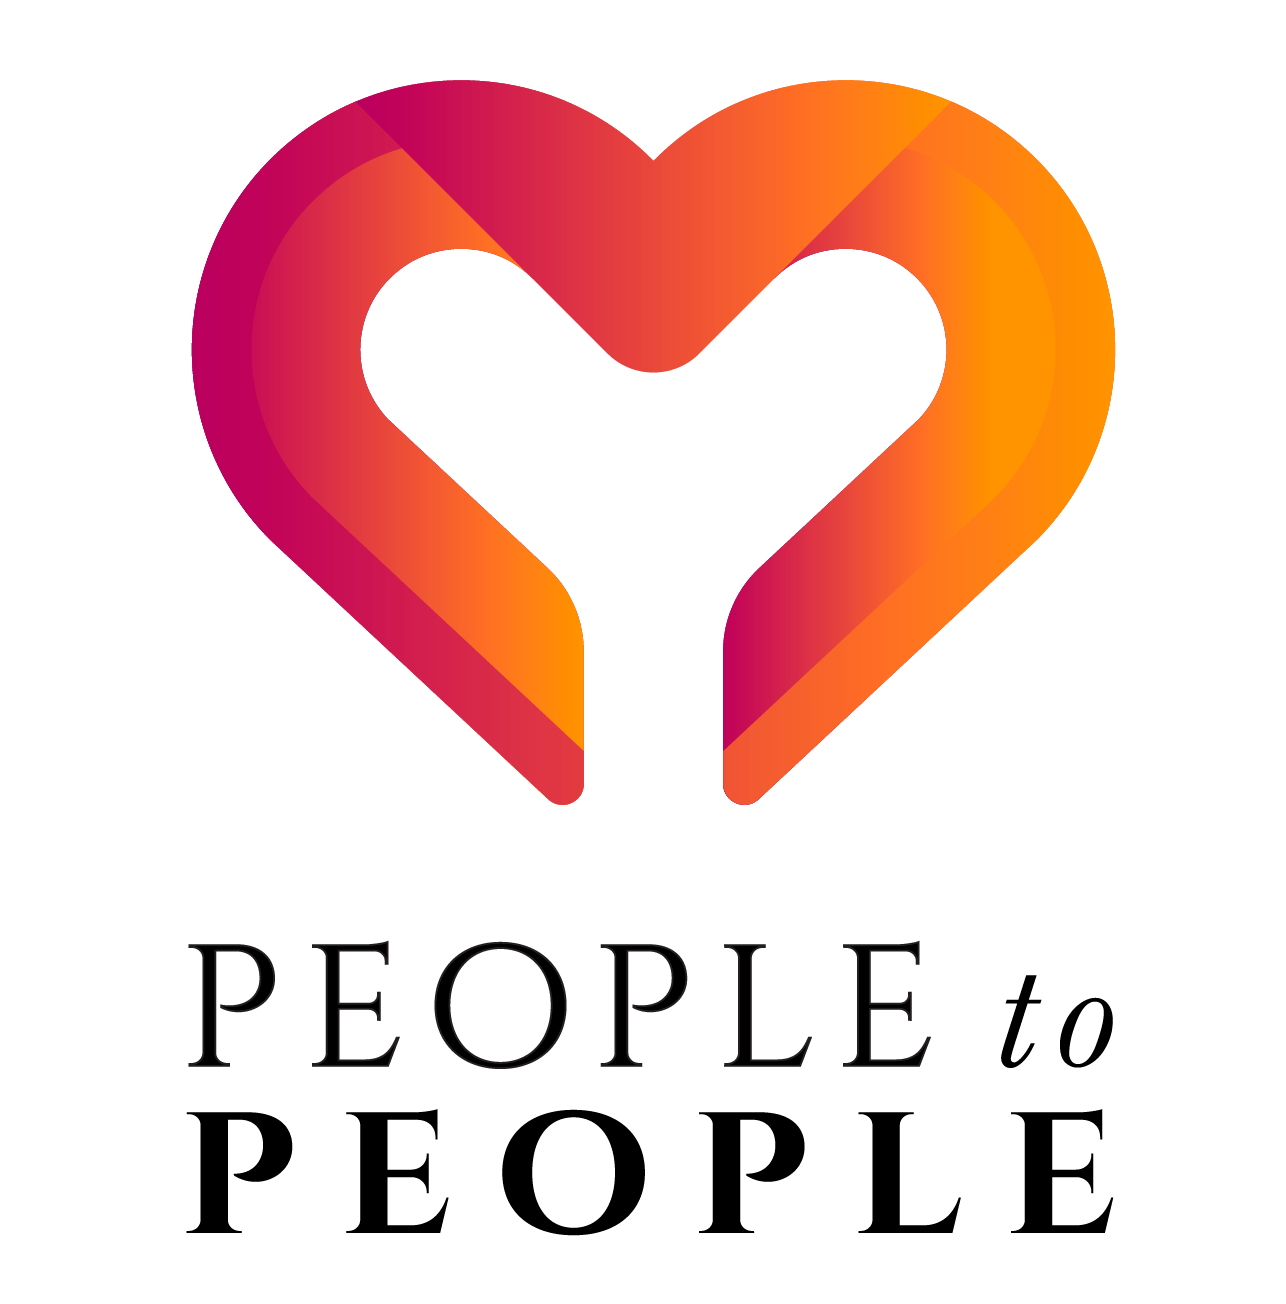 Announcing Logo - Announcing People to People New Logo to People Ministries